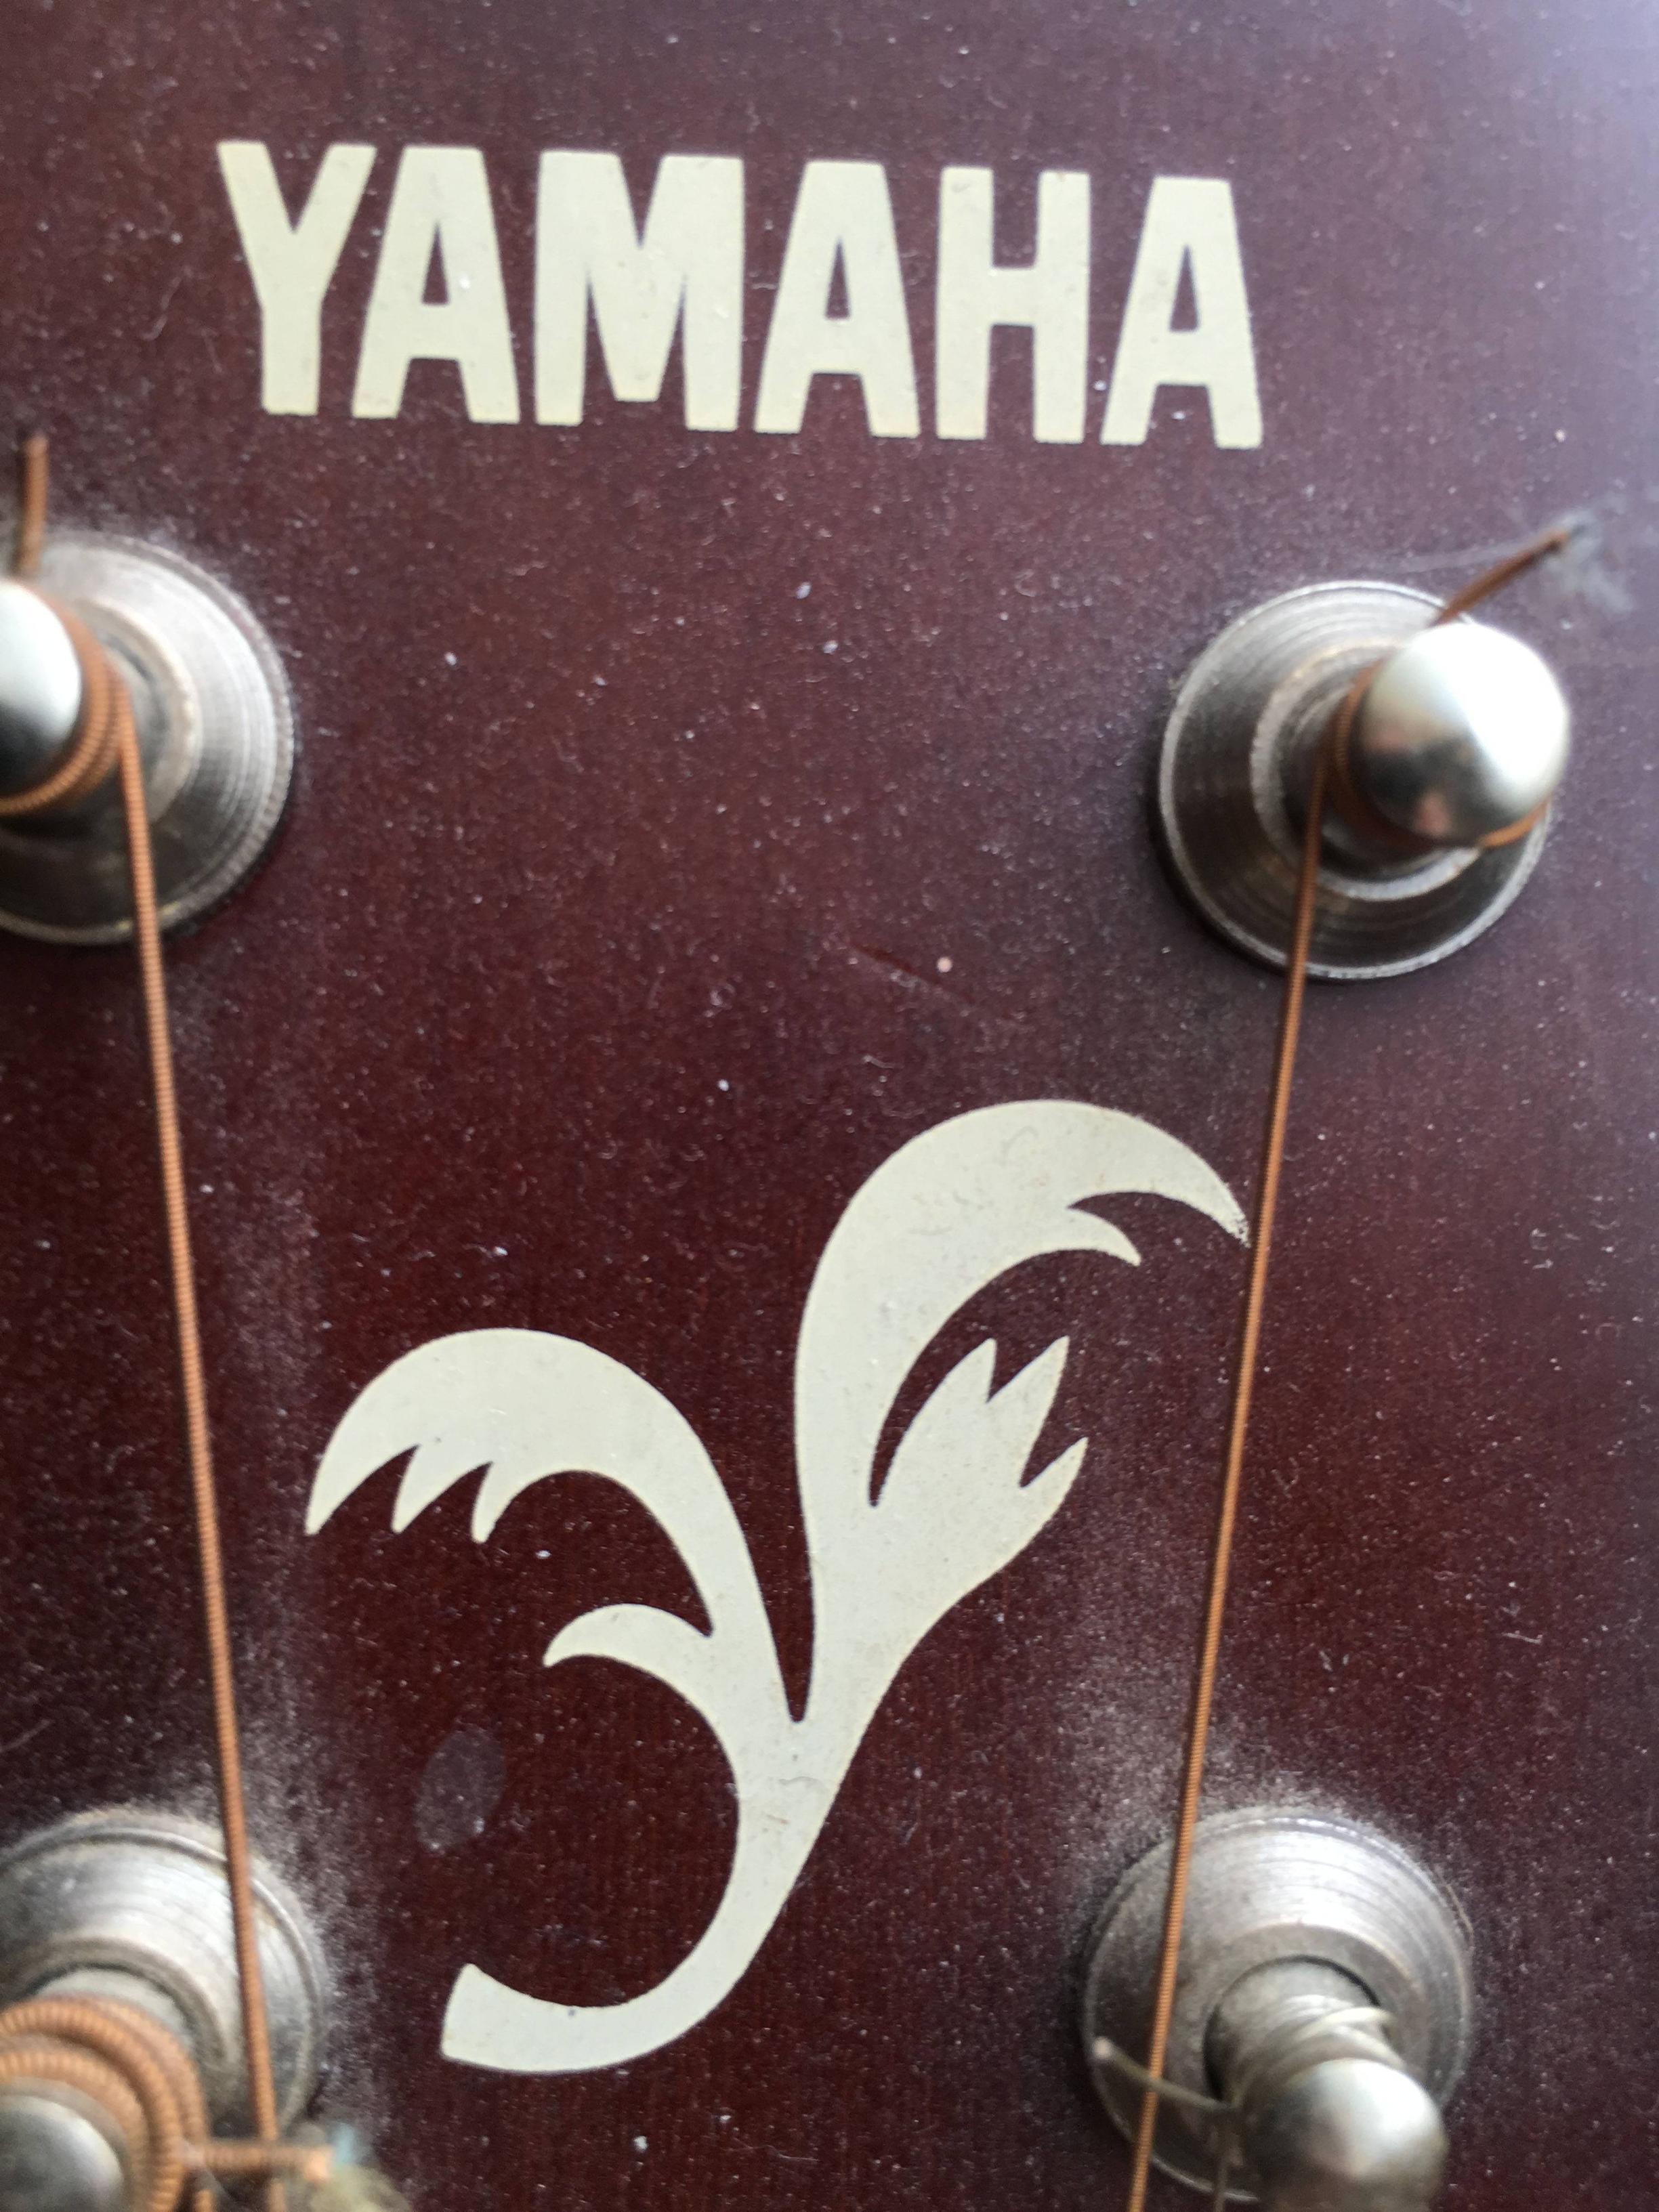 Yamaha Guitar Logo - I want to know about this guitar. it's real yamaha product or fake ...